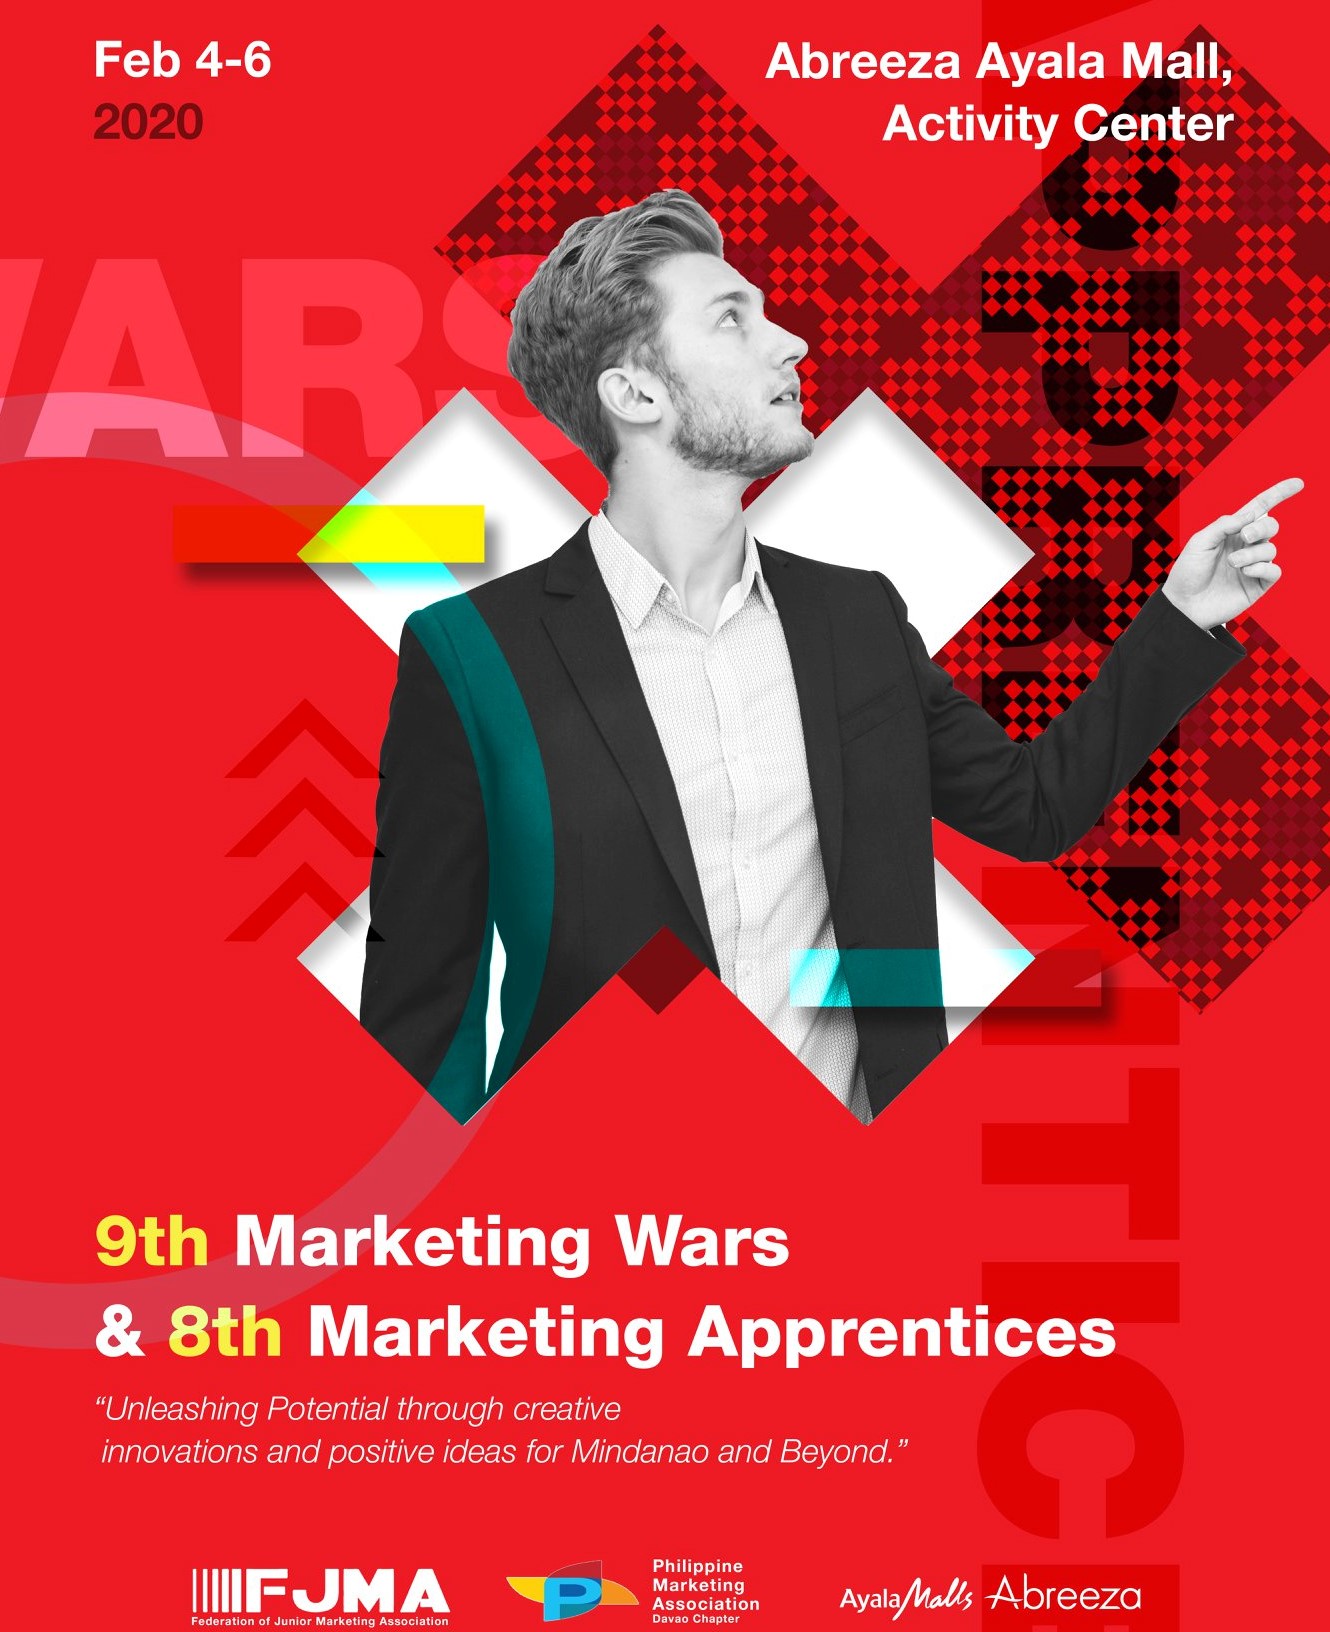 UM Marketing Management emerge as champions in 9th Marketing Wars and 8th Marketing Apprentice